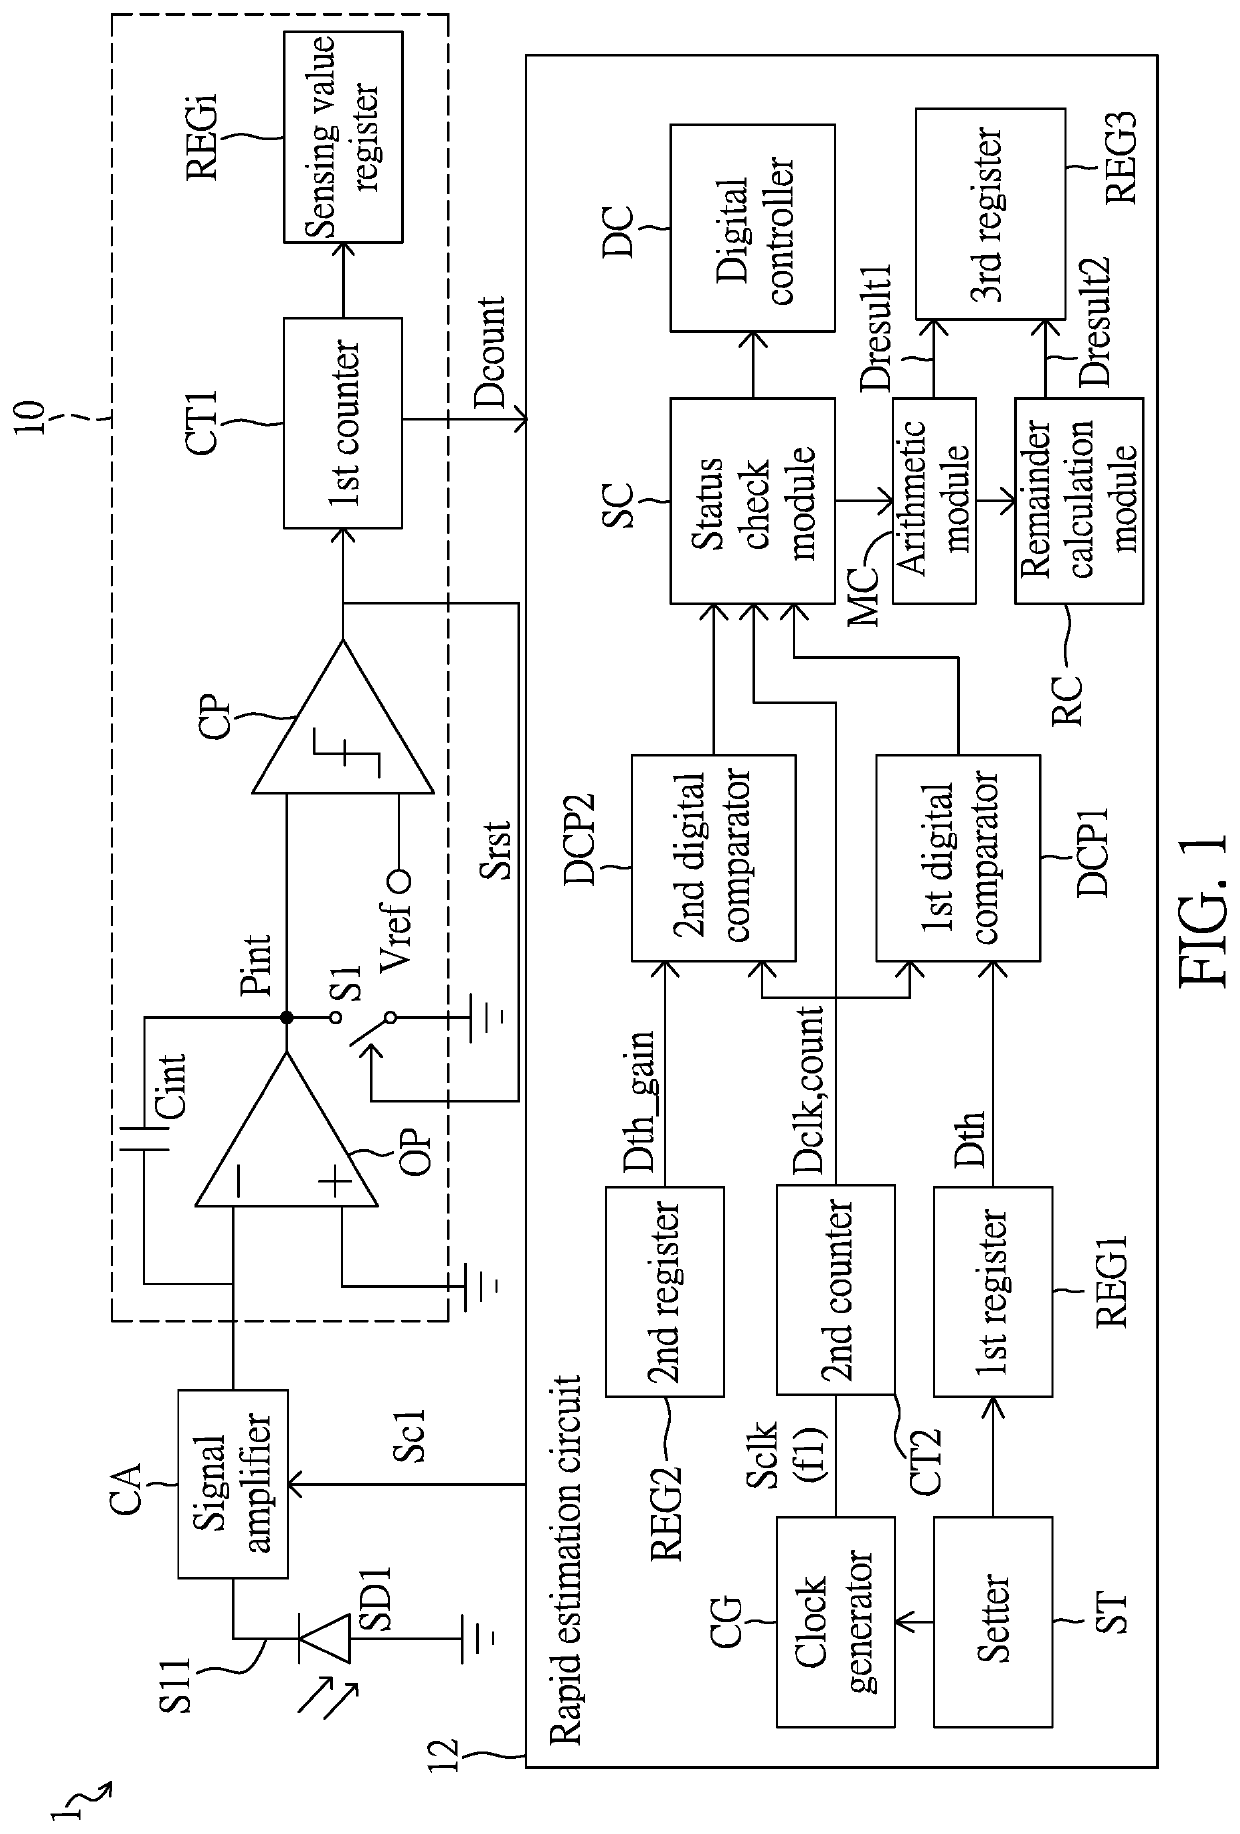 Rapid sensing value estimation circuit and method thereof